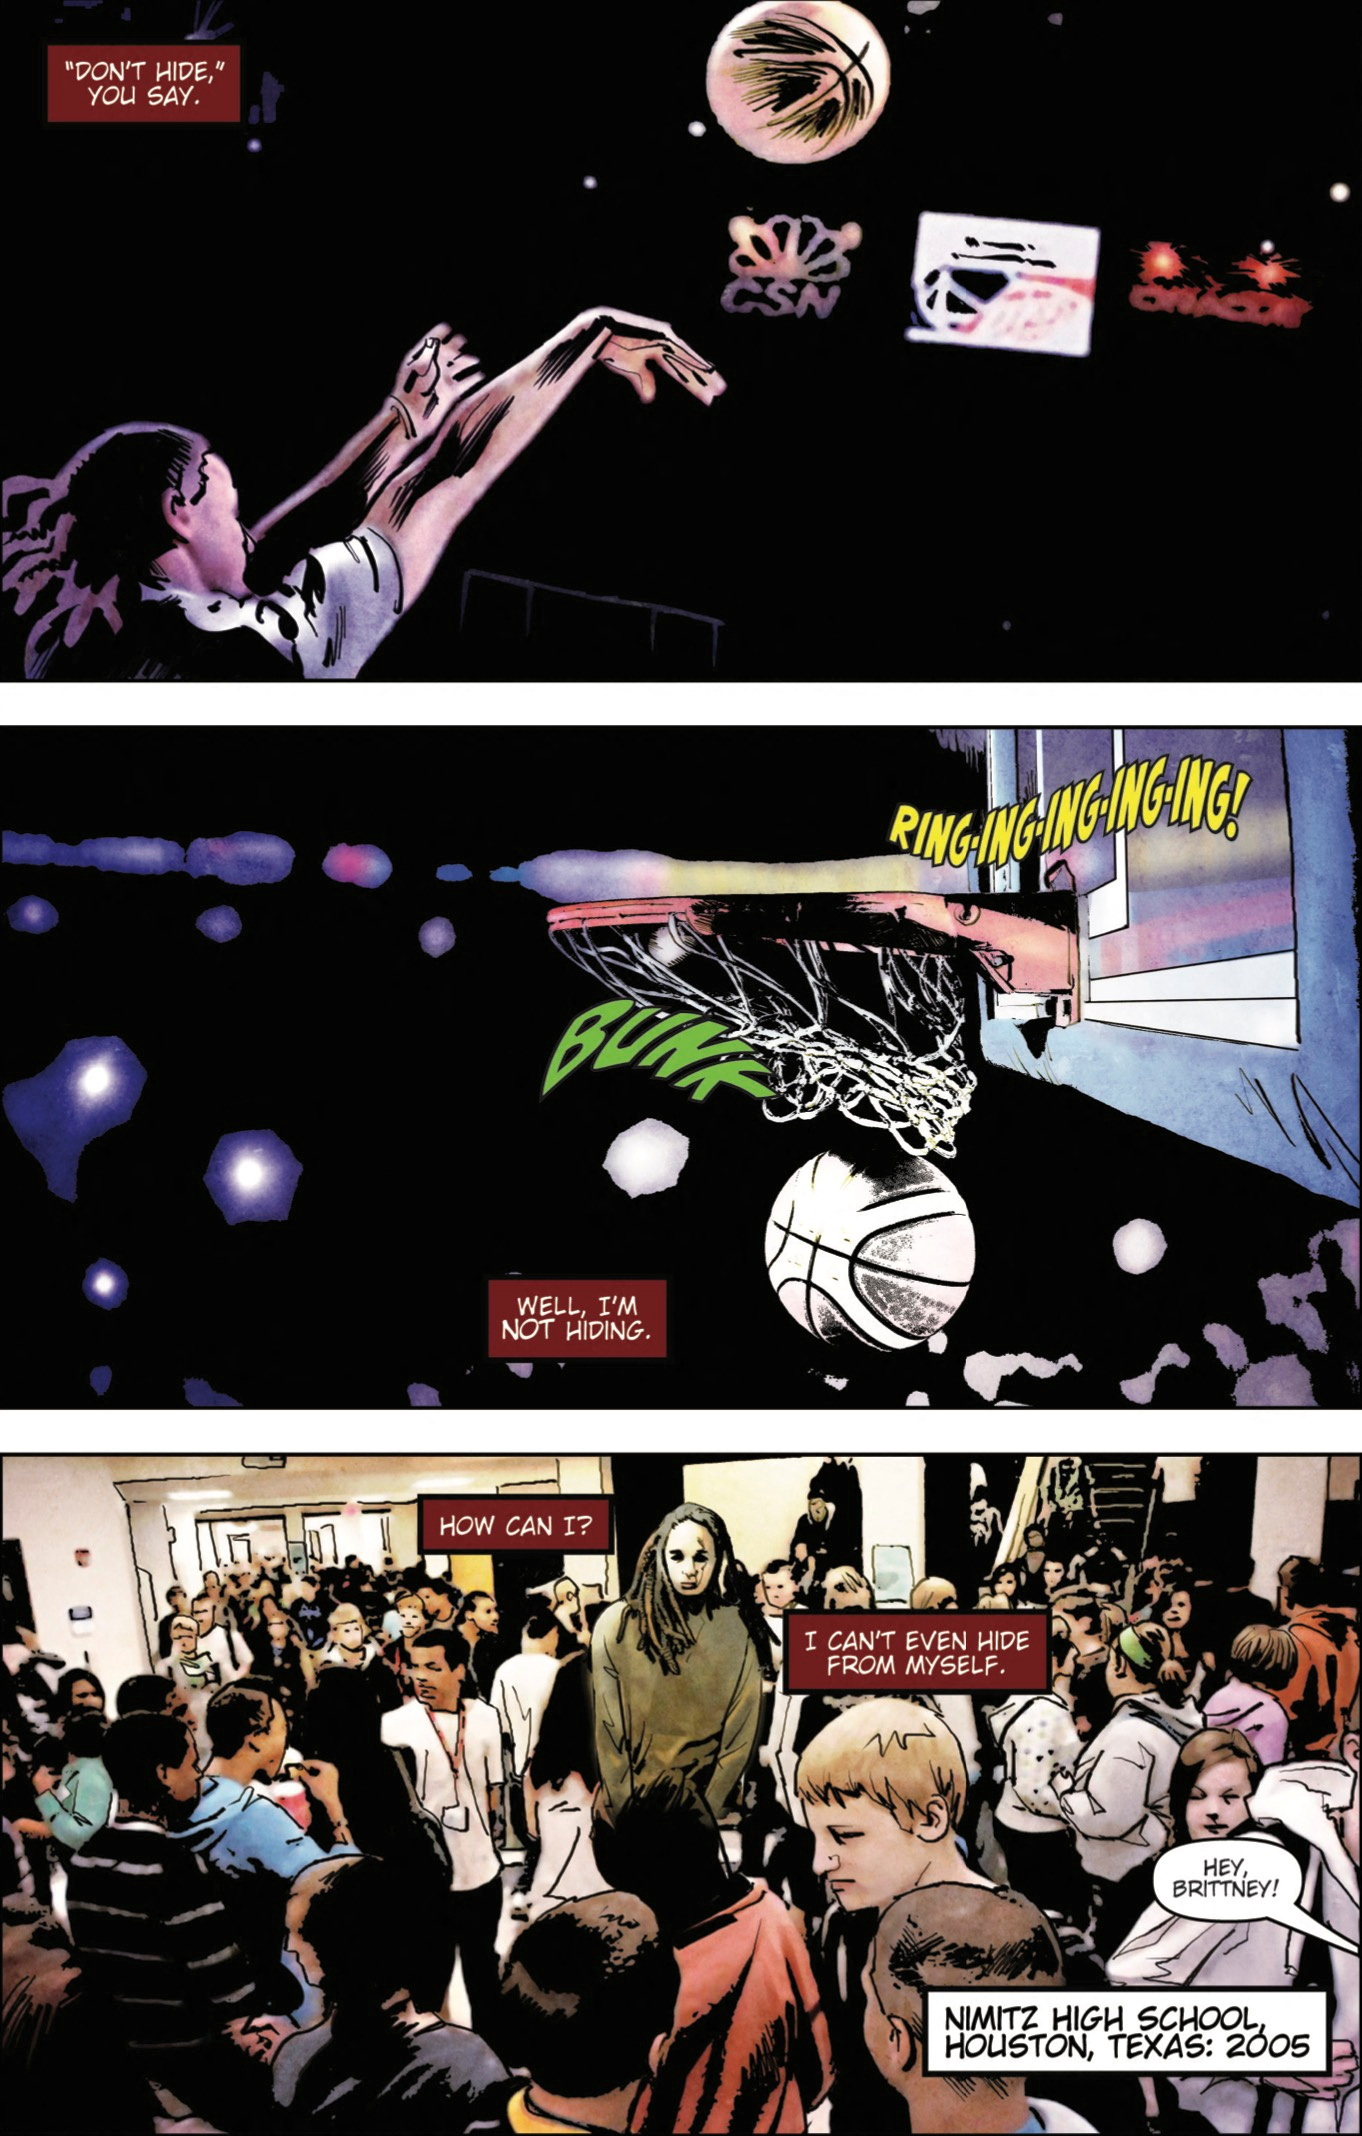 FILE PHOTO: A screen grab of a page of a new comic book on Brittney Griner, obtained by Reuters on January 11, 2023. TidalWave Comics/Handout via REUTERS